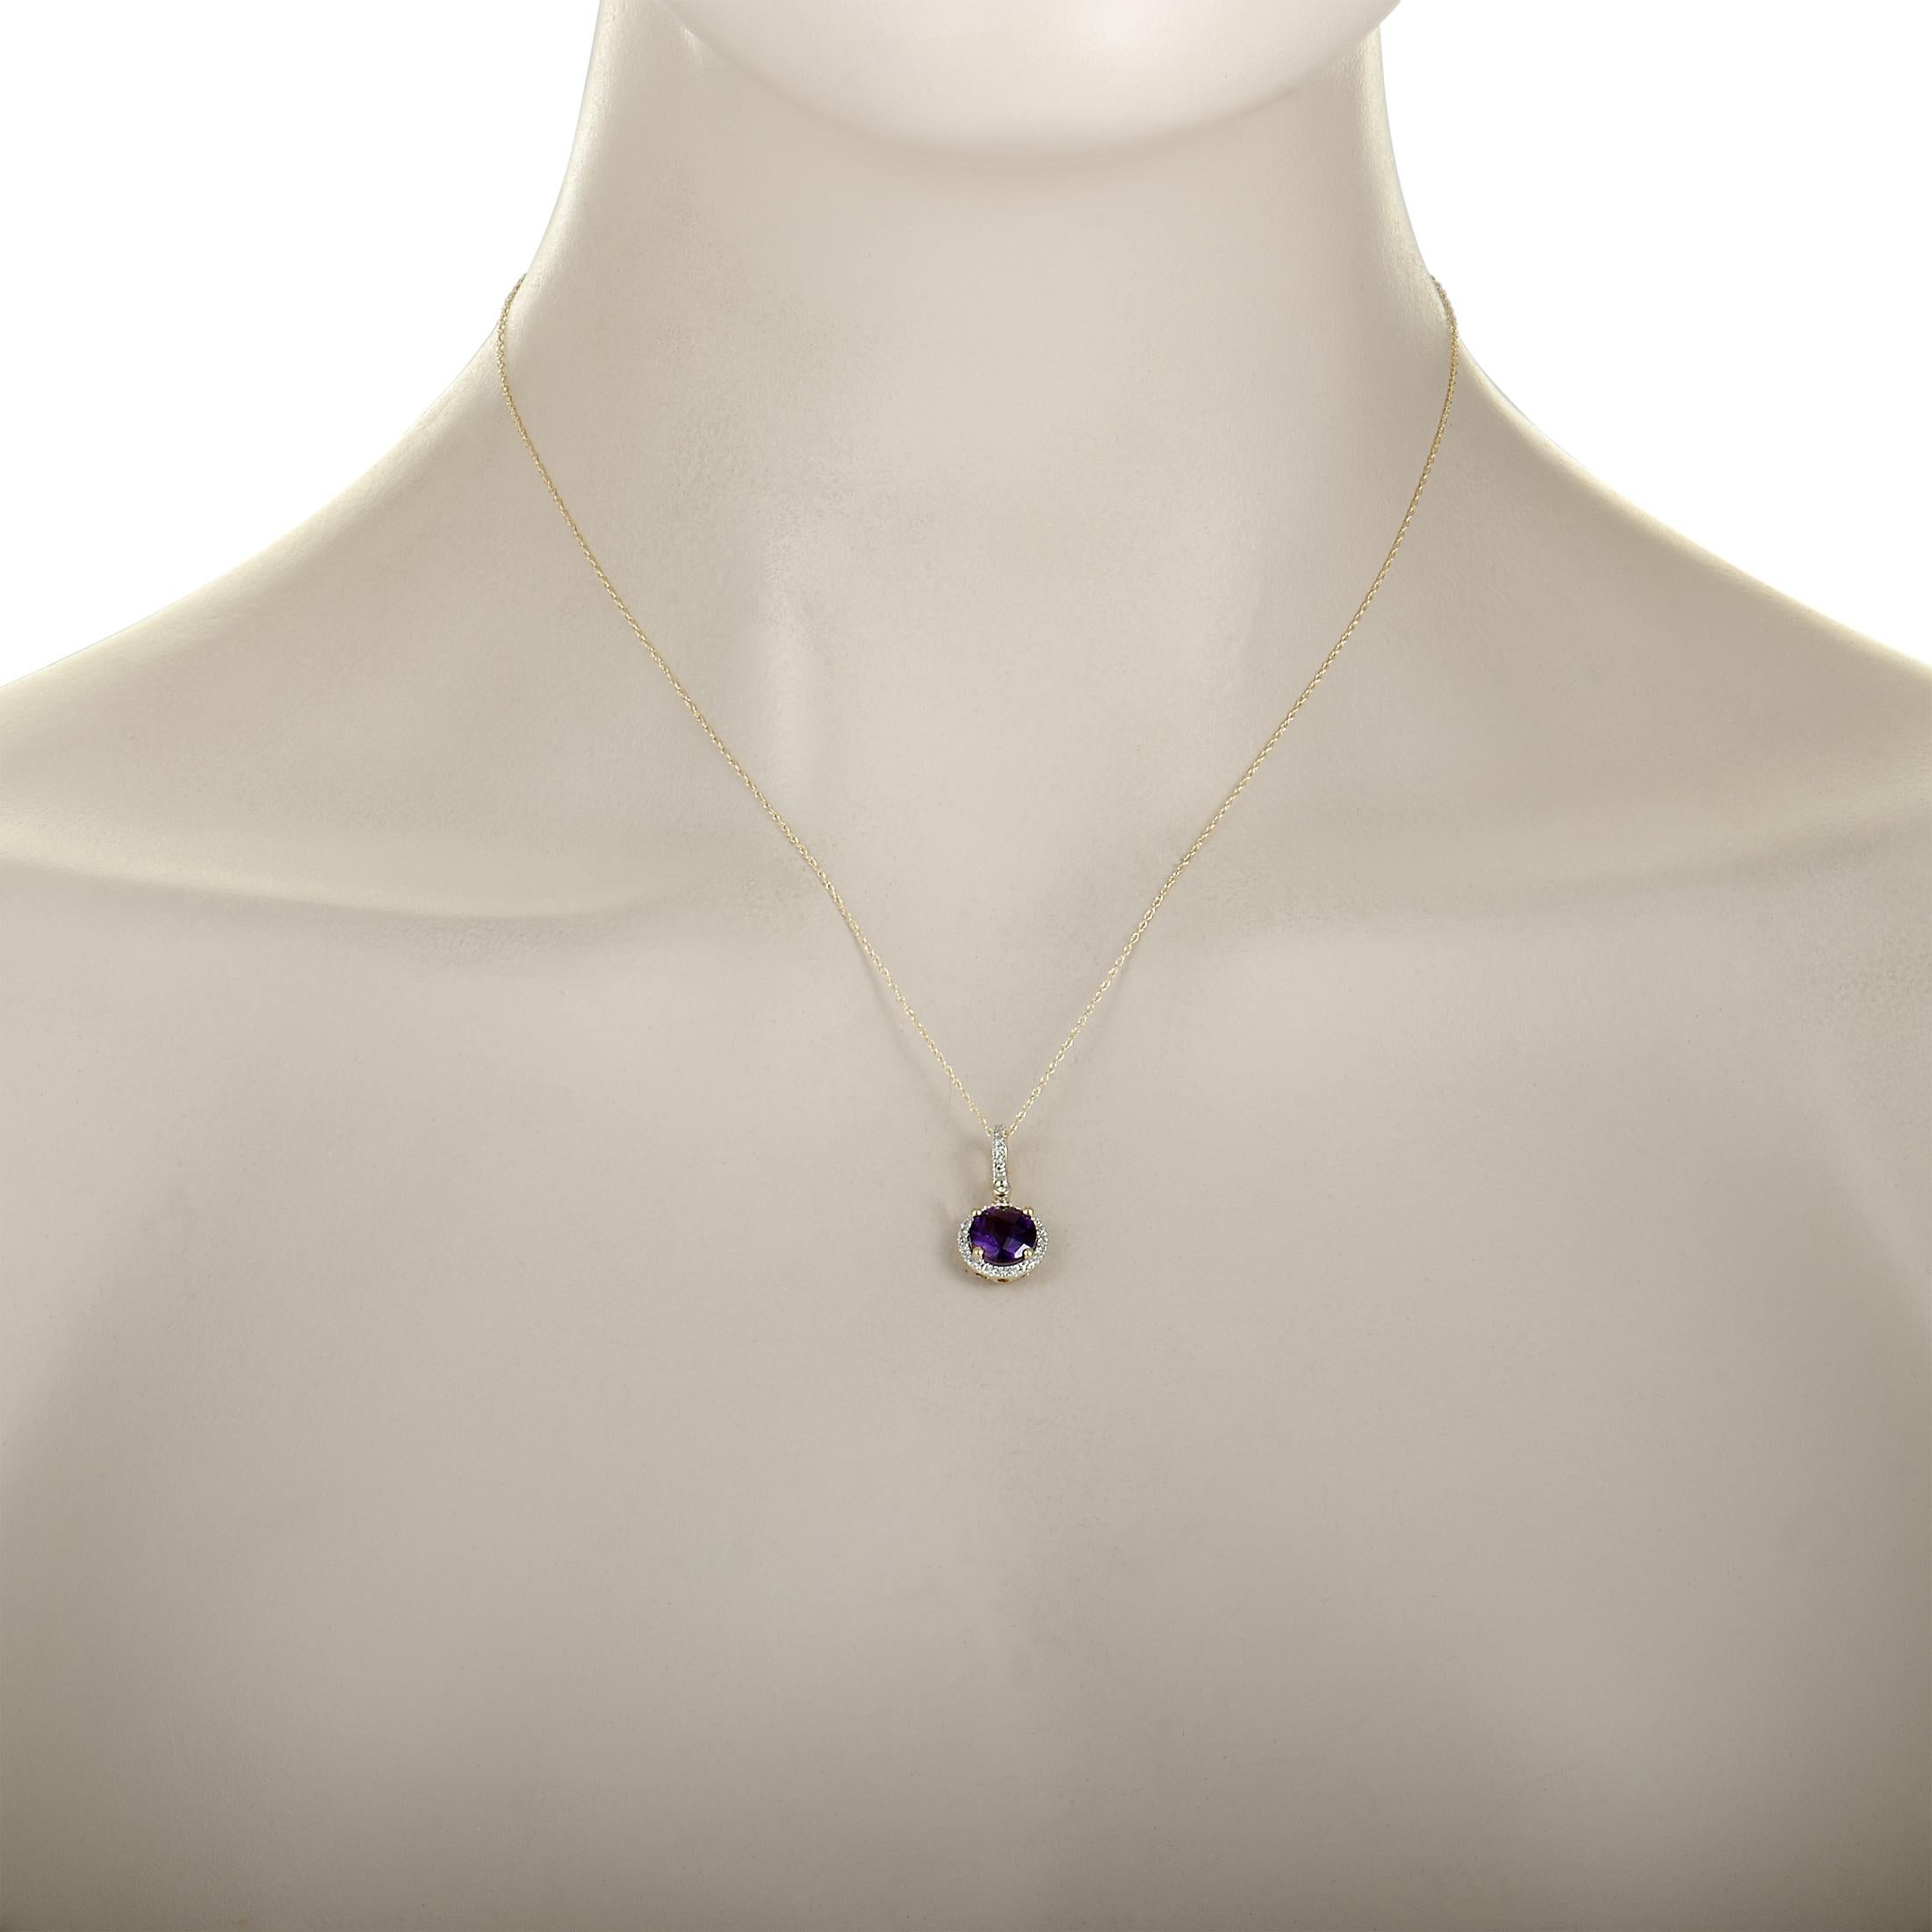 This necklace is made of 14K yellow gold and set with an amethyst and a total of 0.11 carats of diamonds. It has a 17.00” long chain with spring ring closure, while the pendant measures 0.75” in length and 0.40” in width. The necklace weighs 2.2